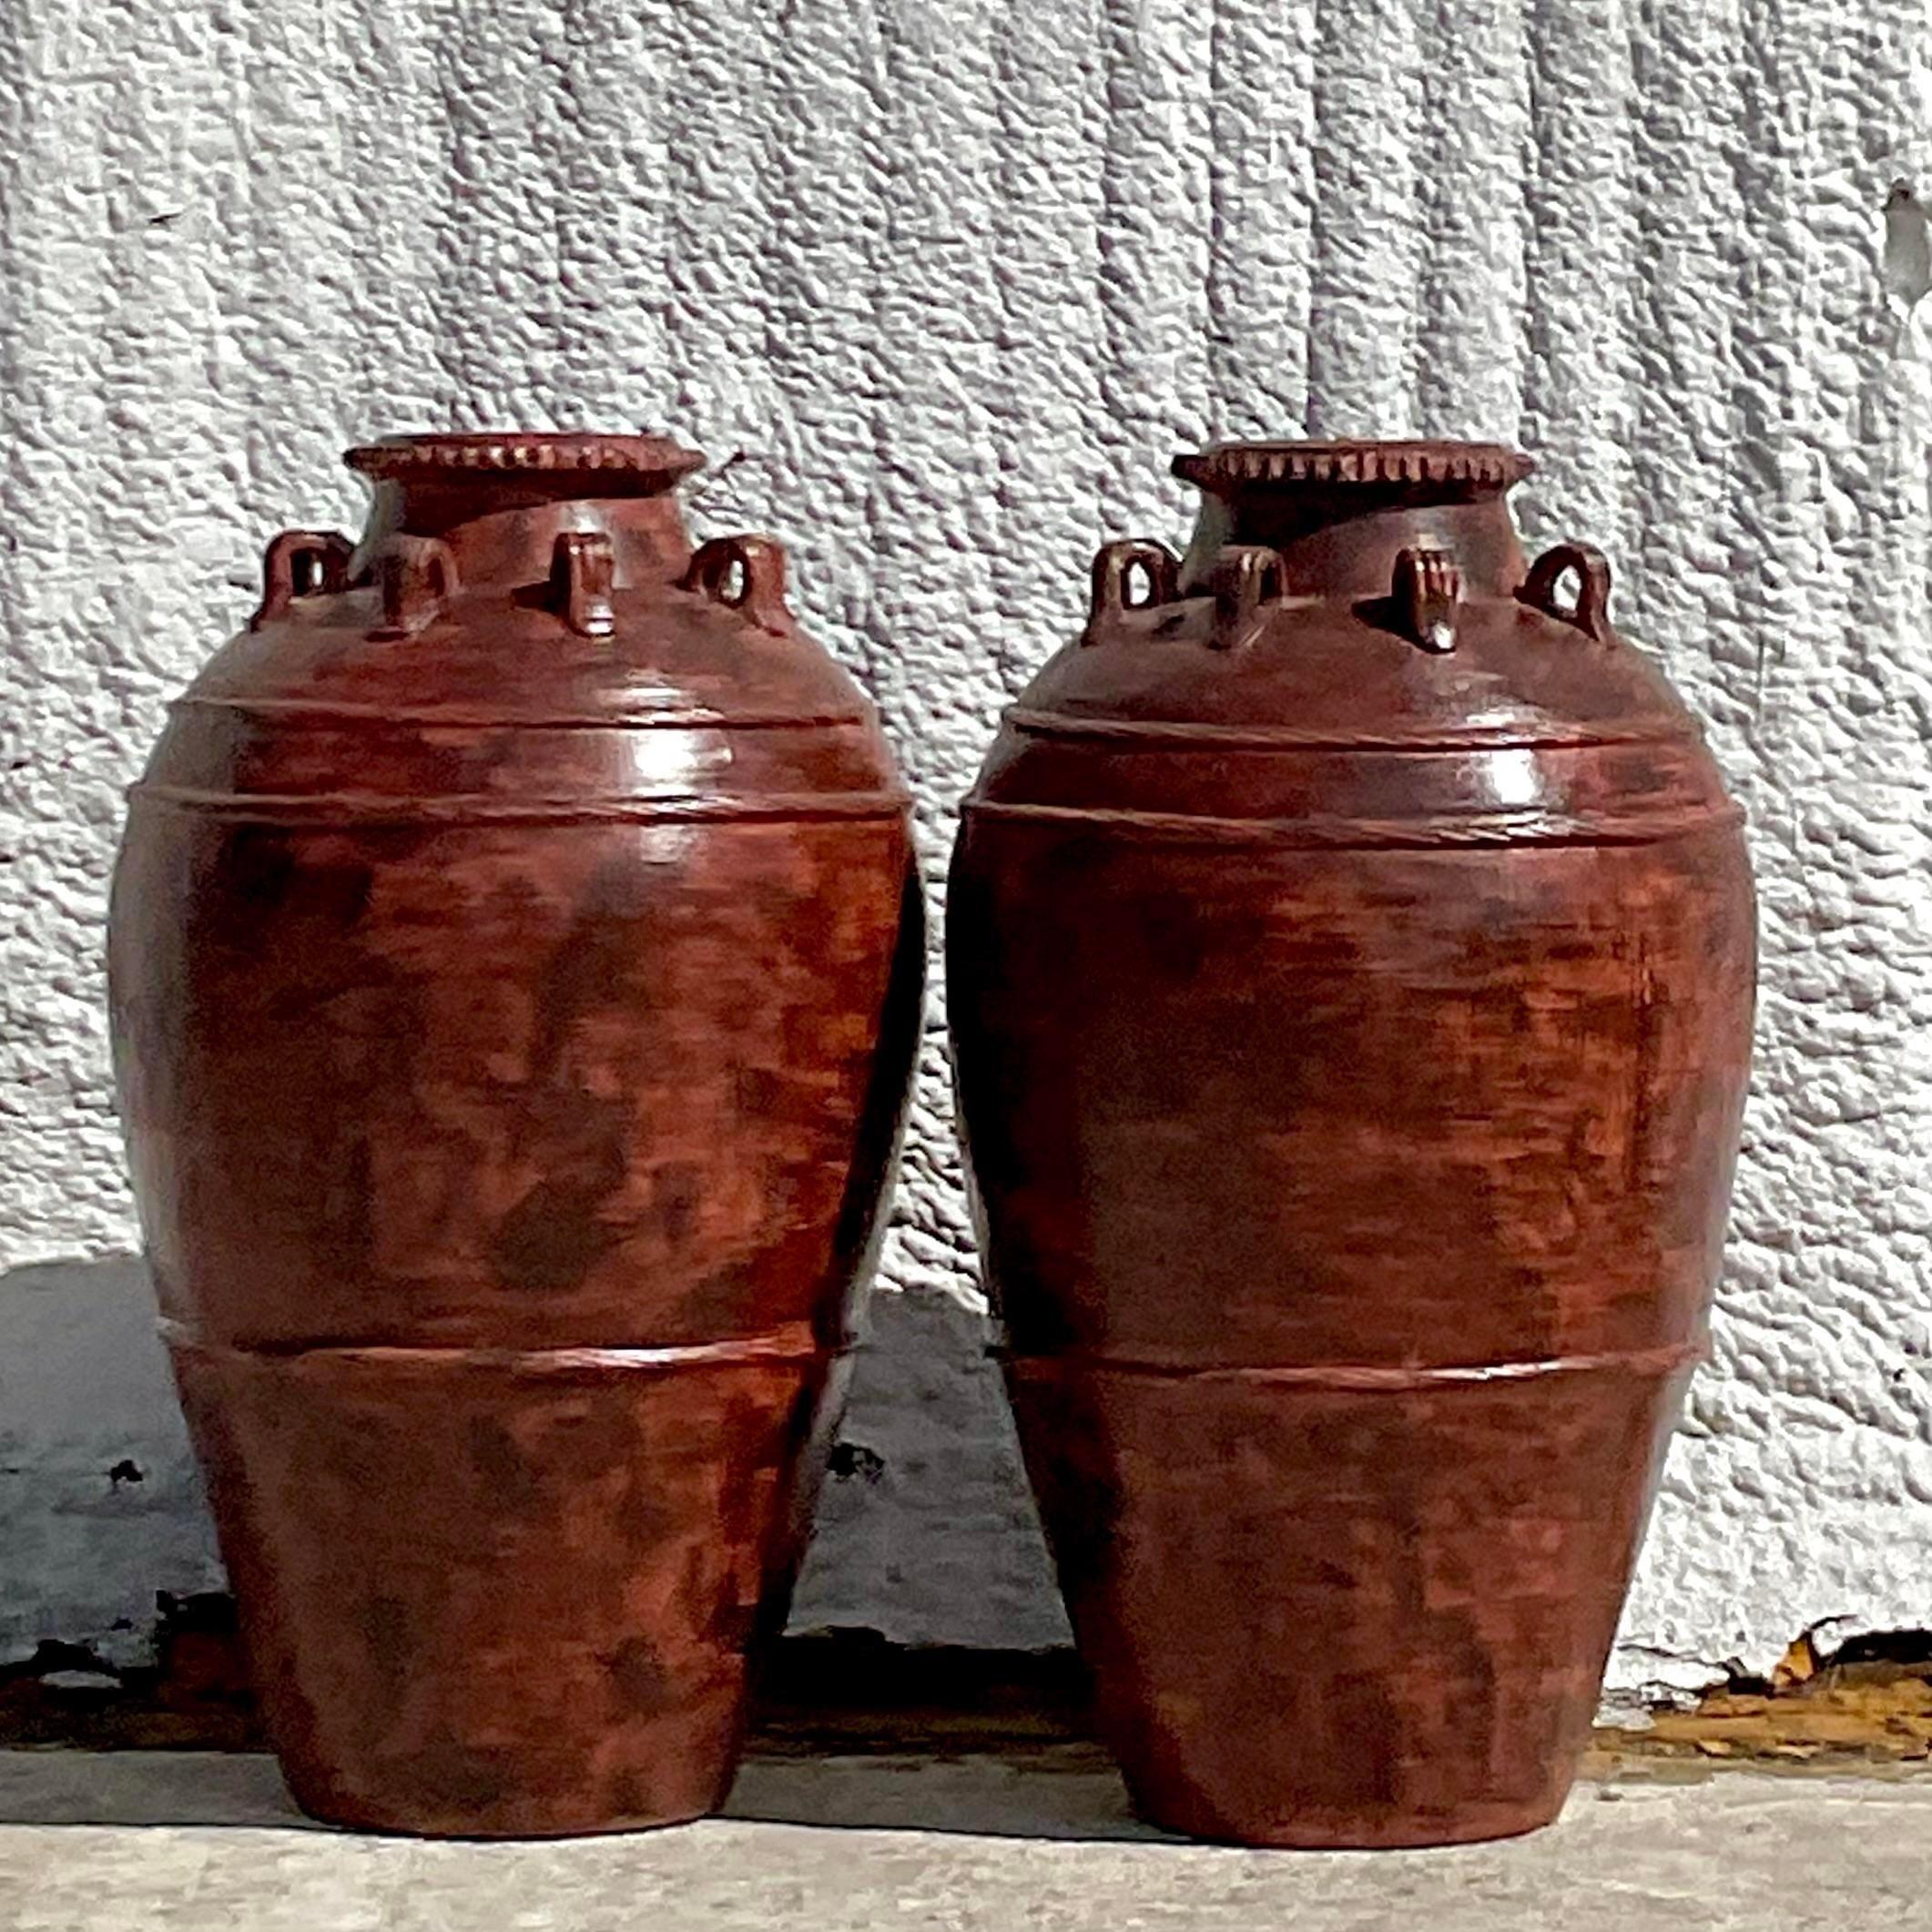 A fabulous pair of vintage Boho urns. Chic hand painted finish in a warm brownish rust color. Perfect indoors or outside in a covered area. Acquired from a Palm Beach estate.